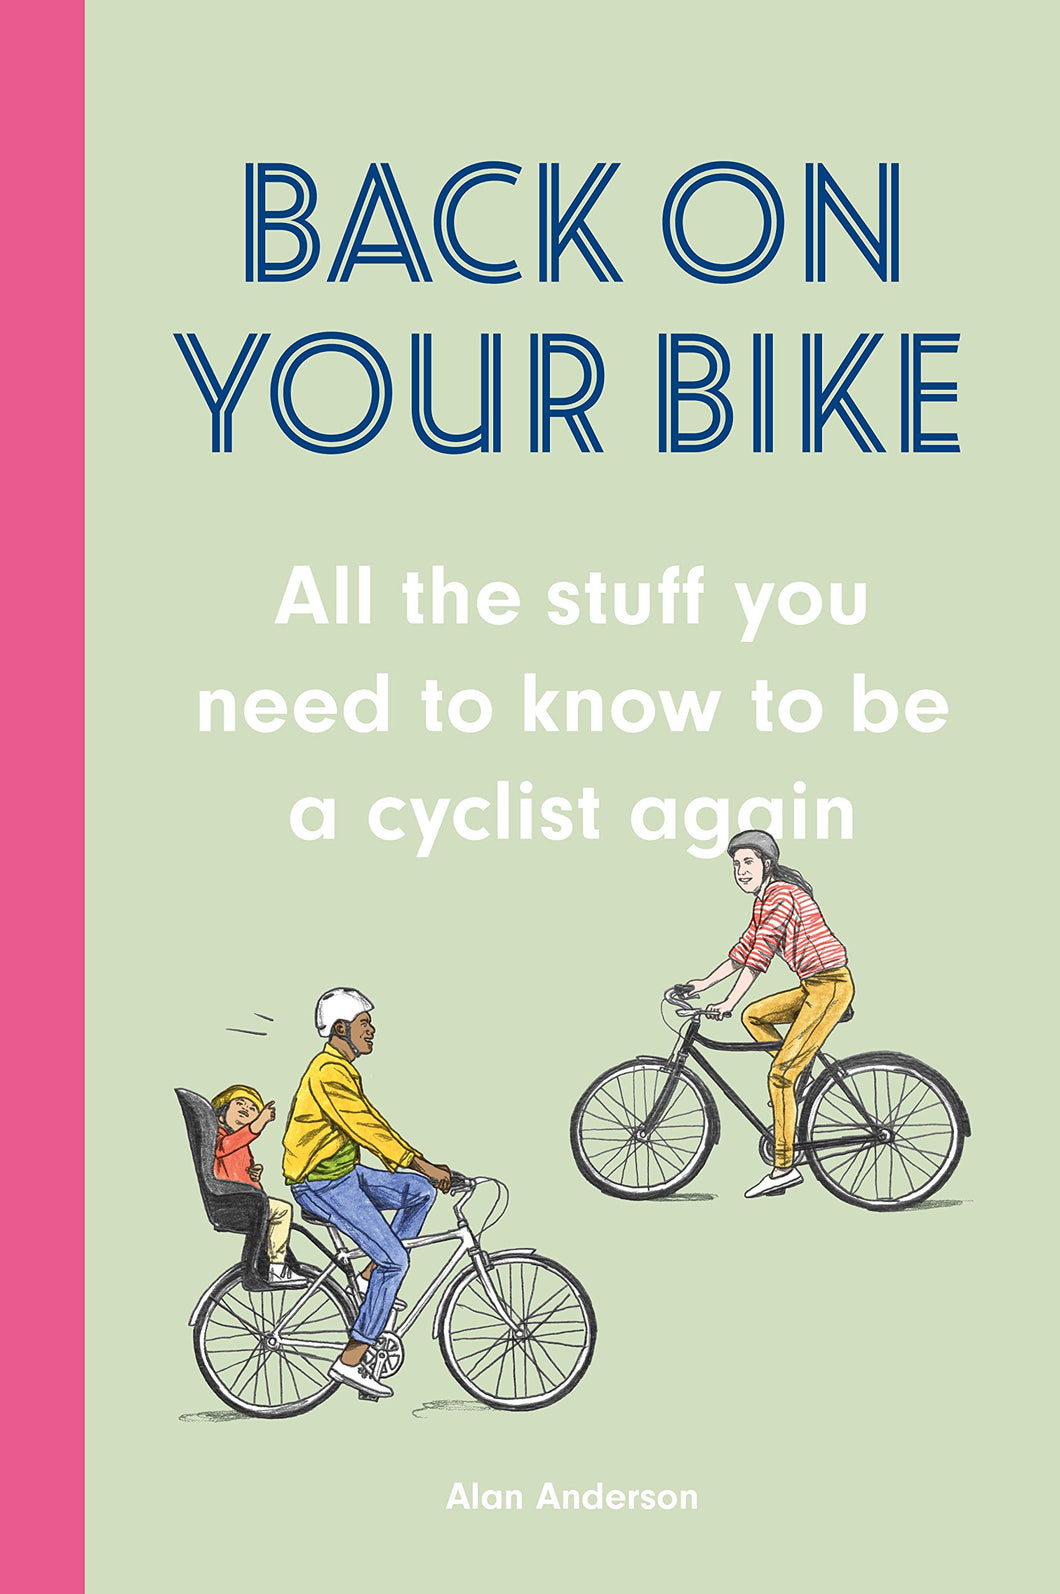 Back on Your Bike: All the Stuff You Need to Know to Be a Cyclist Again [Alan Anderson]